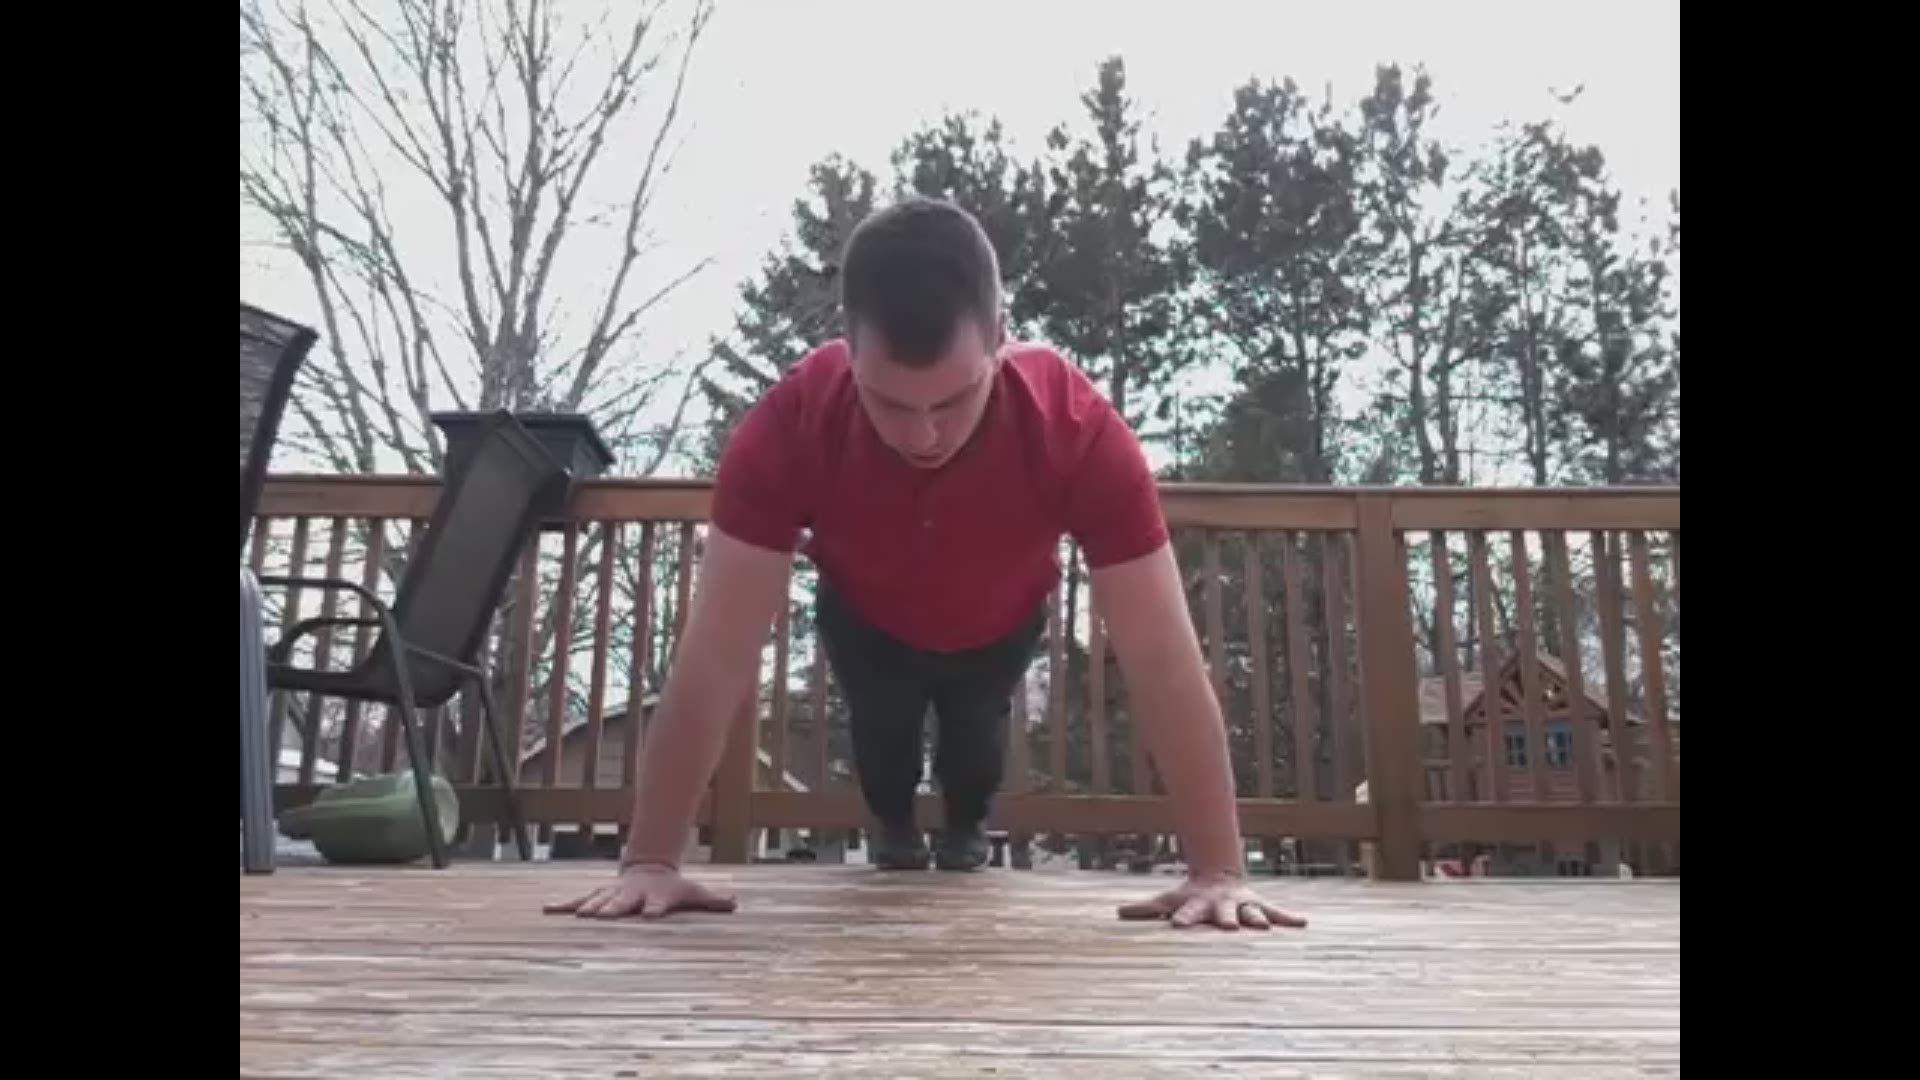 This father of three has pushed himself to do as many pushups as he physically could for the last 955 days.